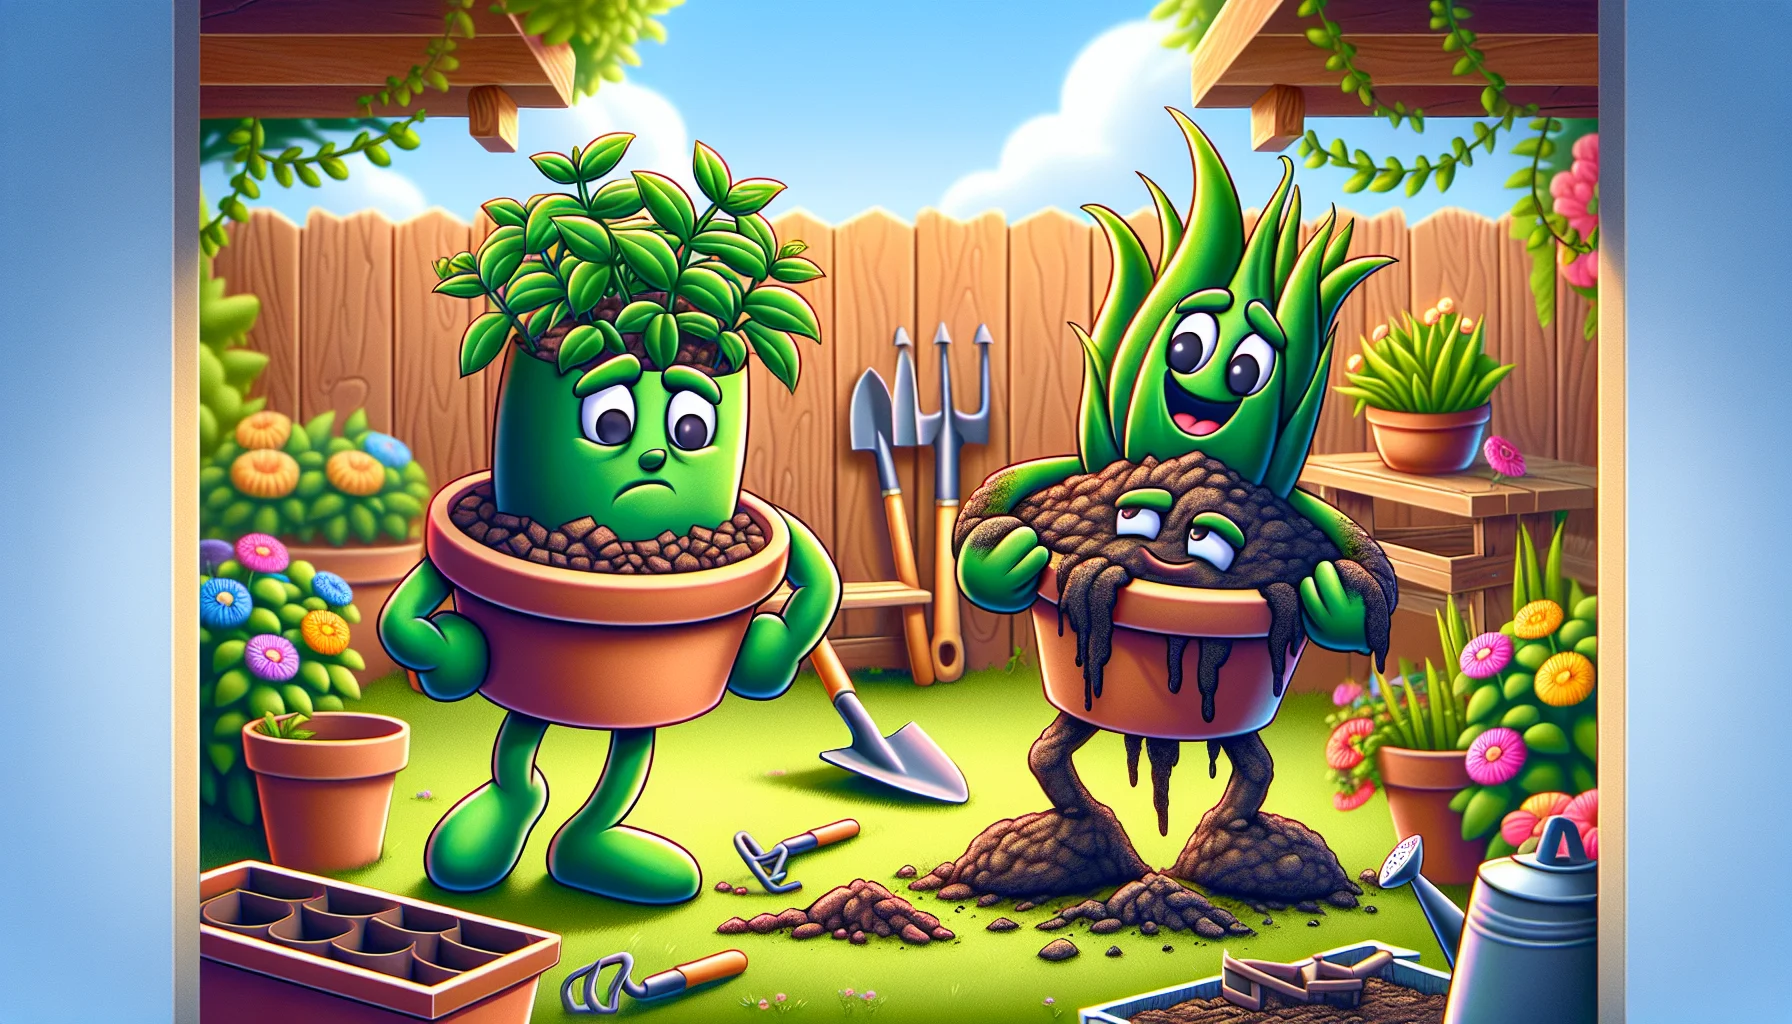 Make a lighthearted and humourous image depicting the differences between potting mix and garden soil in a gardening setting. In it, depict the potting mix and garden soil as animated characters with expressive faces. The potting mix should be proudly showing off a potted plant with lush, healthy green leaves, while the garden soil is struggling to lift a wilting plant in a garden setting. The backdrop should be a sunny garden with a variety of colorful flowers, garden tools scattered around, and a wooden fence. This image should spark joy and encourage viewers to find the fun in gardening.